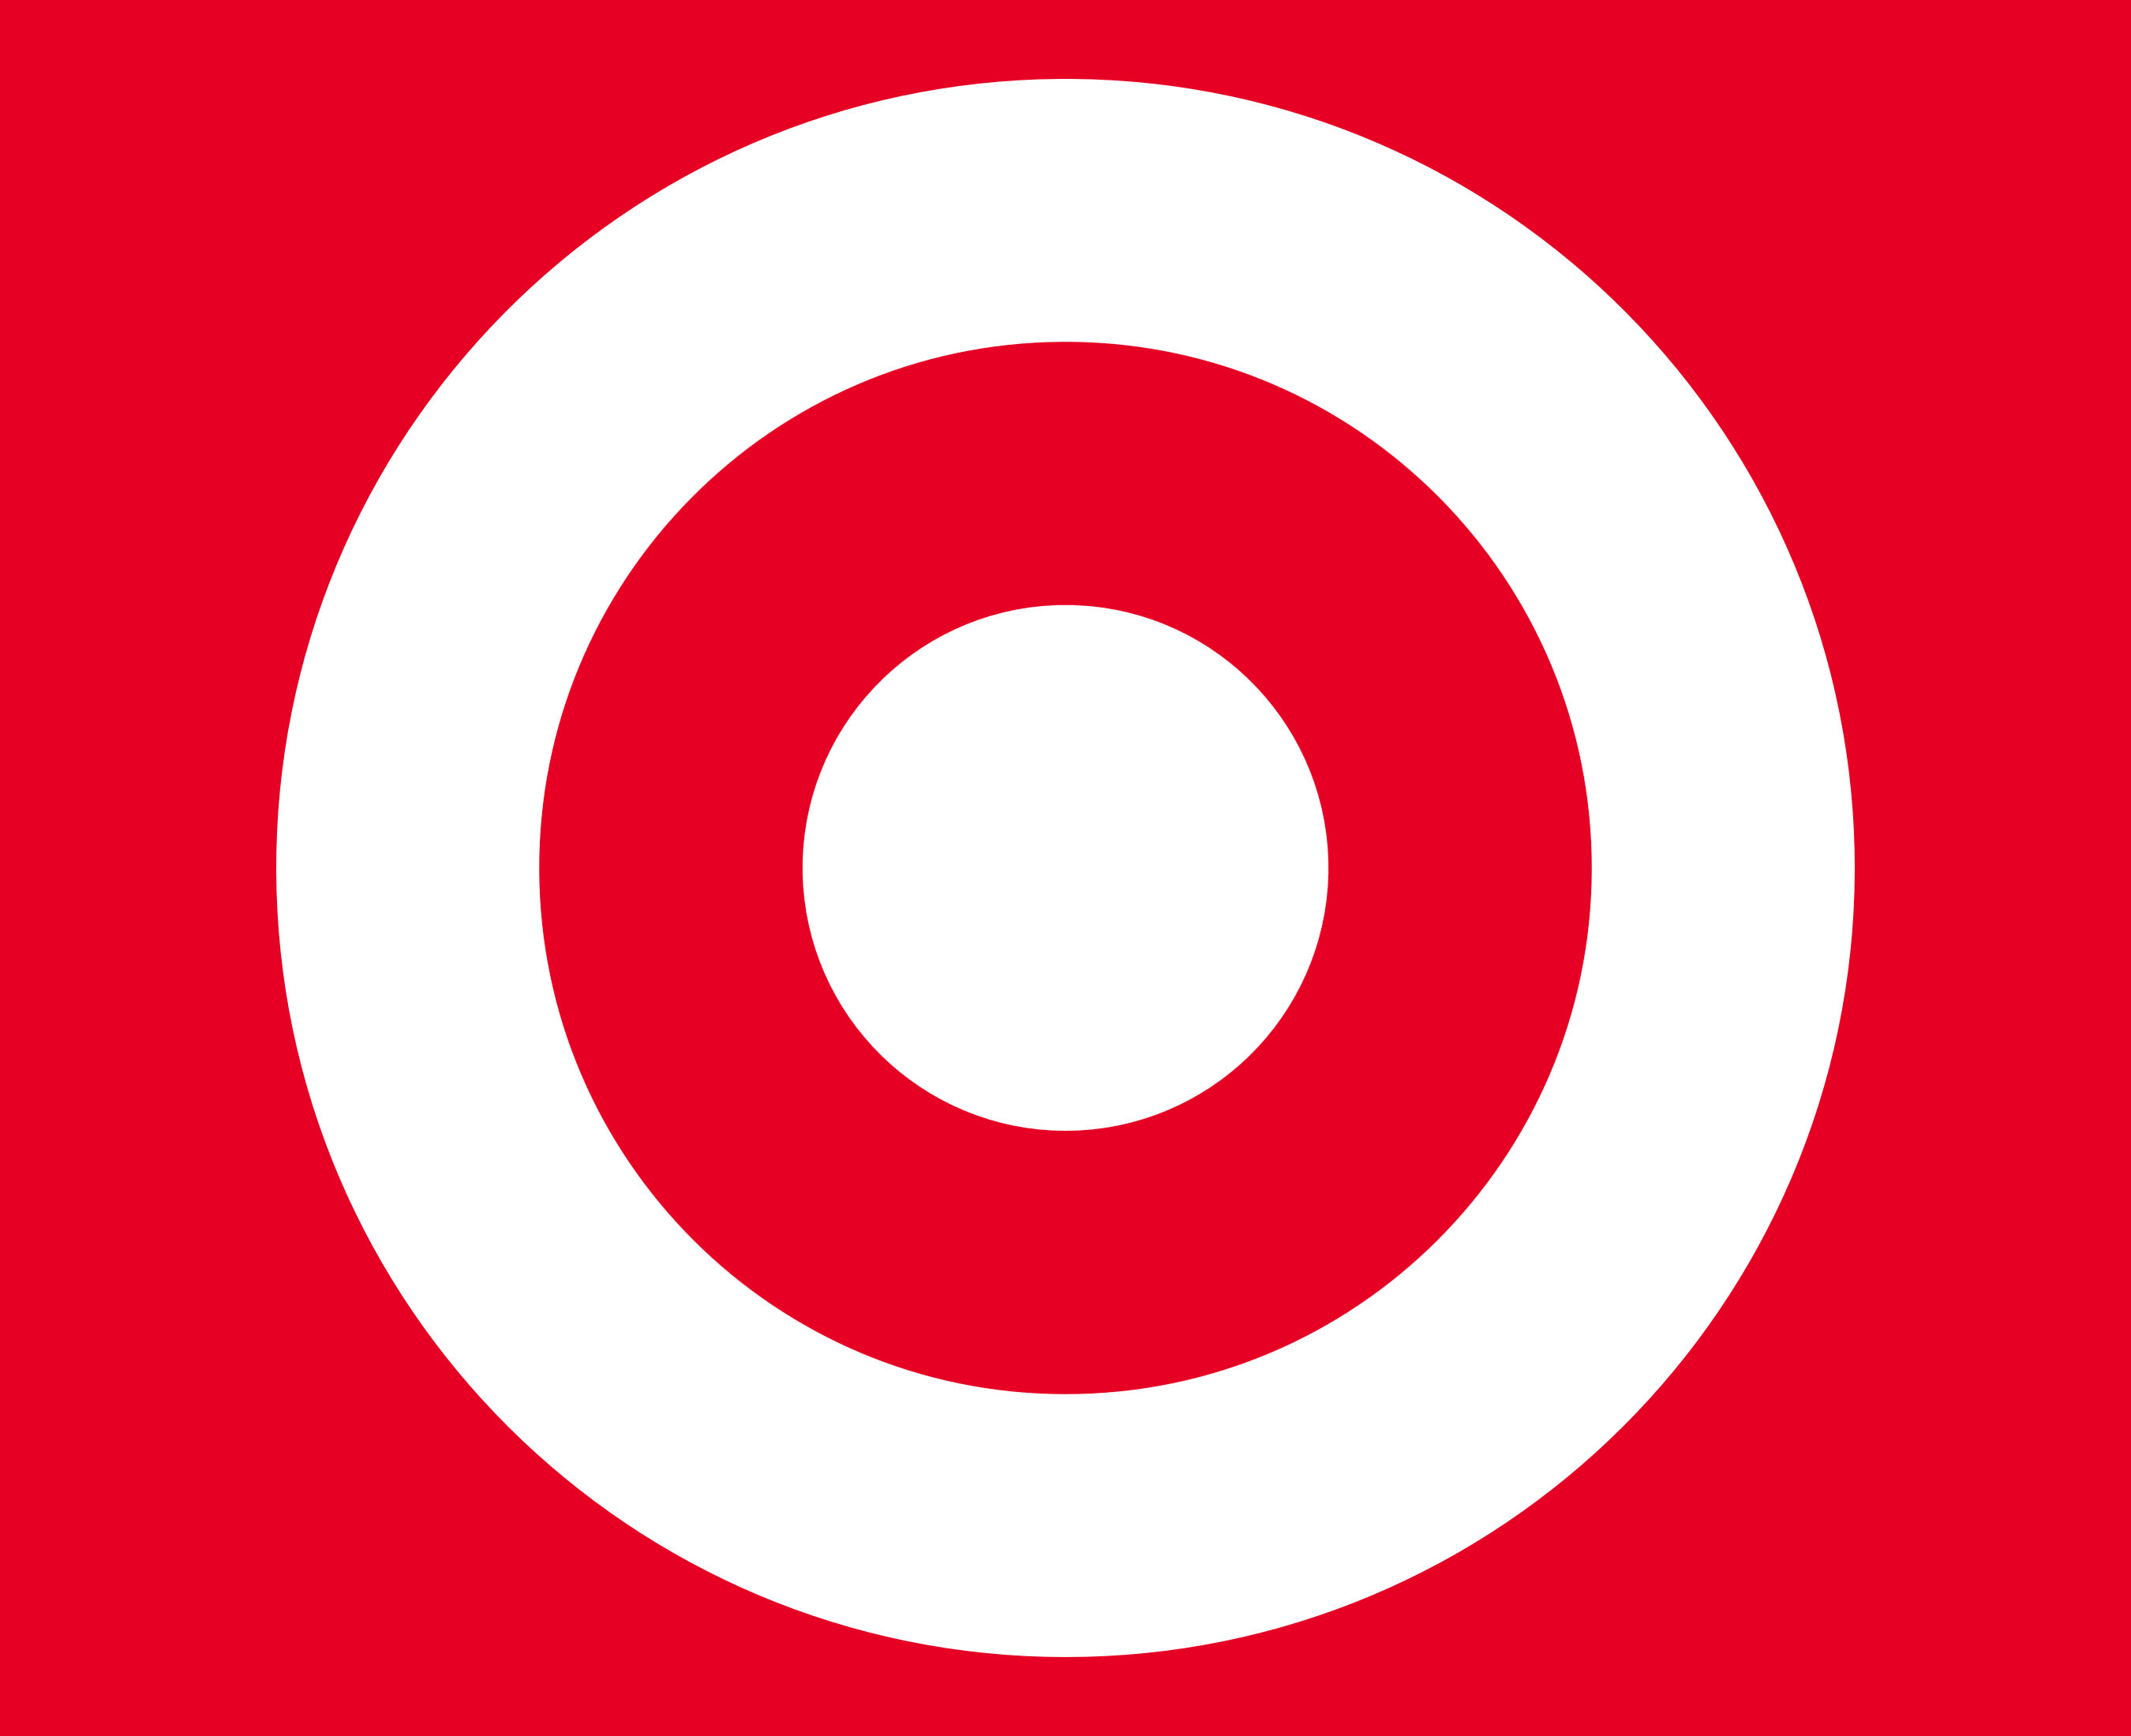 Red and White Logo - Target Logo, Target Symbol, Meaning, History and Evolution